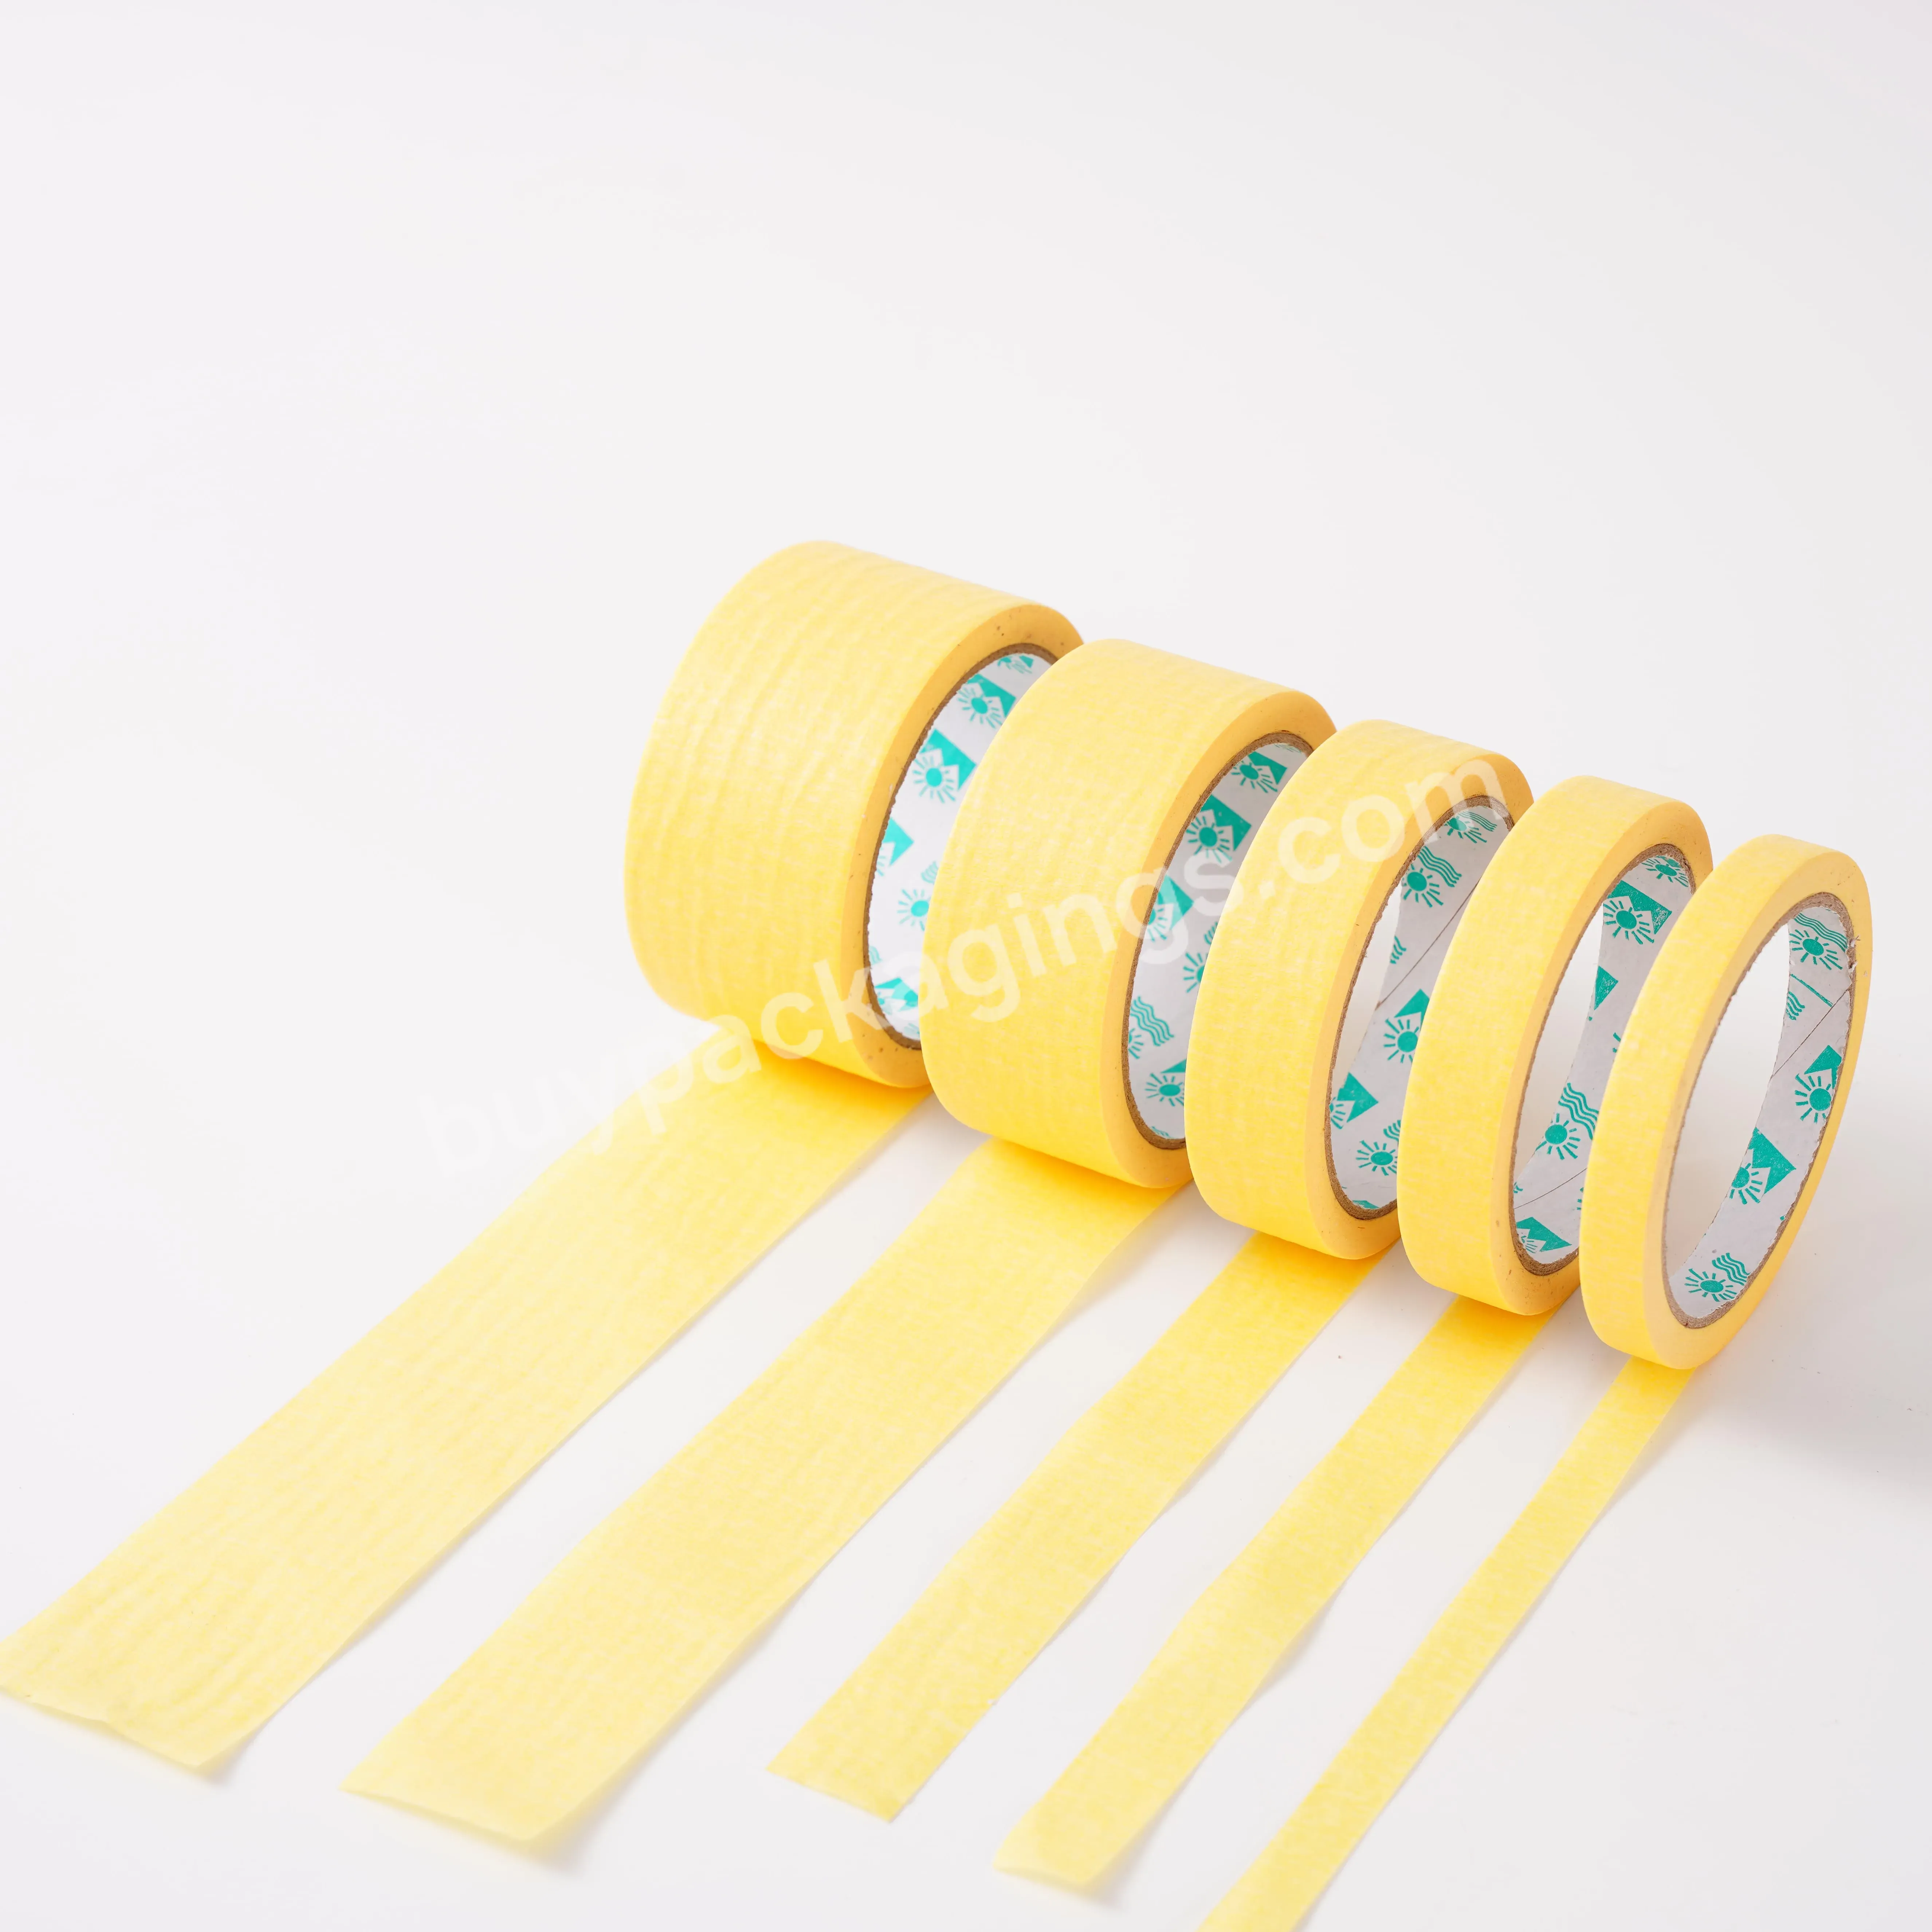 Cheap Price Refinish Masking Tape For Car Painting Use With Temperature Resistance - Buy Painter Masking Tape,Masking Tape For Painting,Masking Tape For Cars Painting.